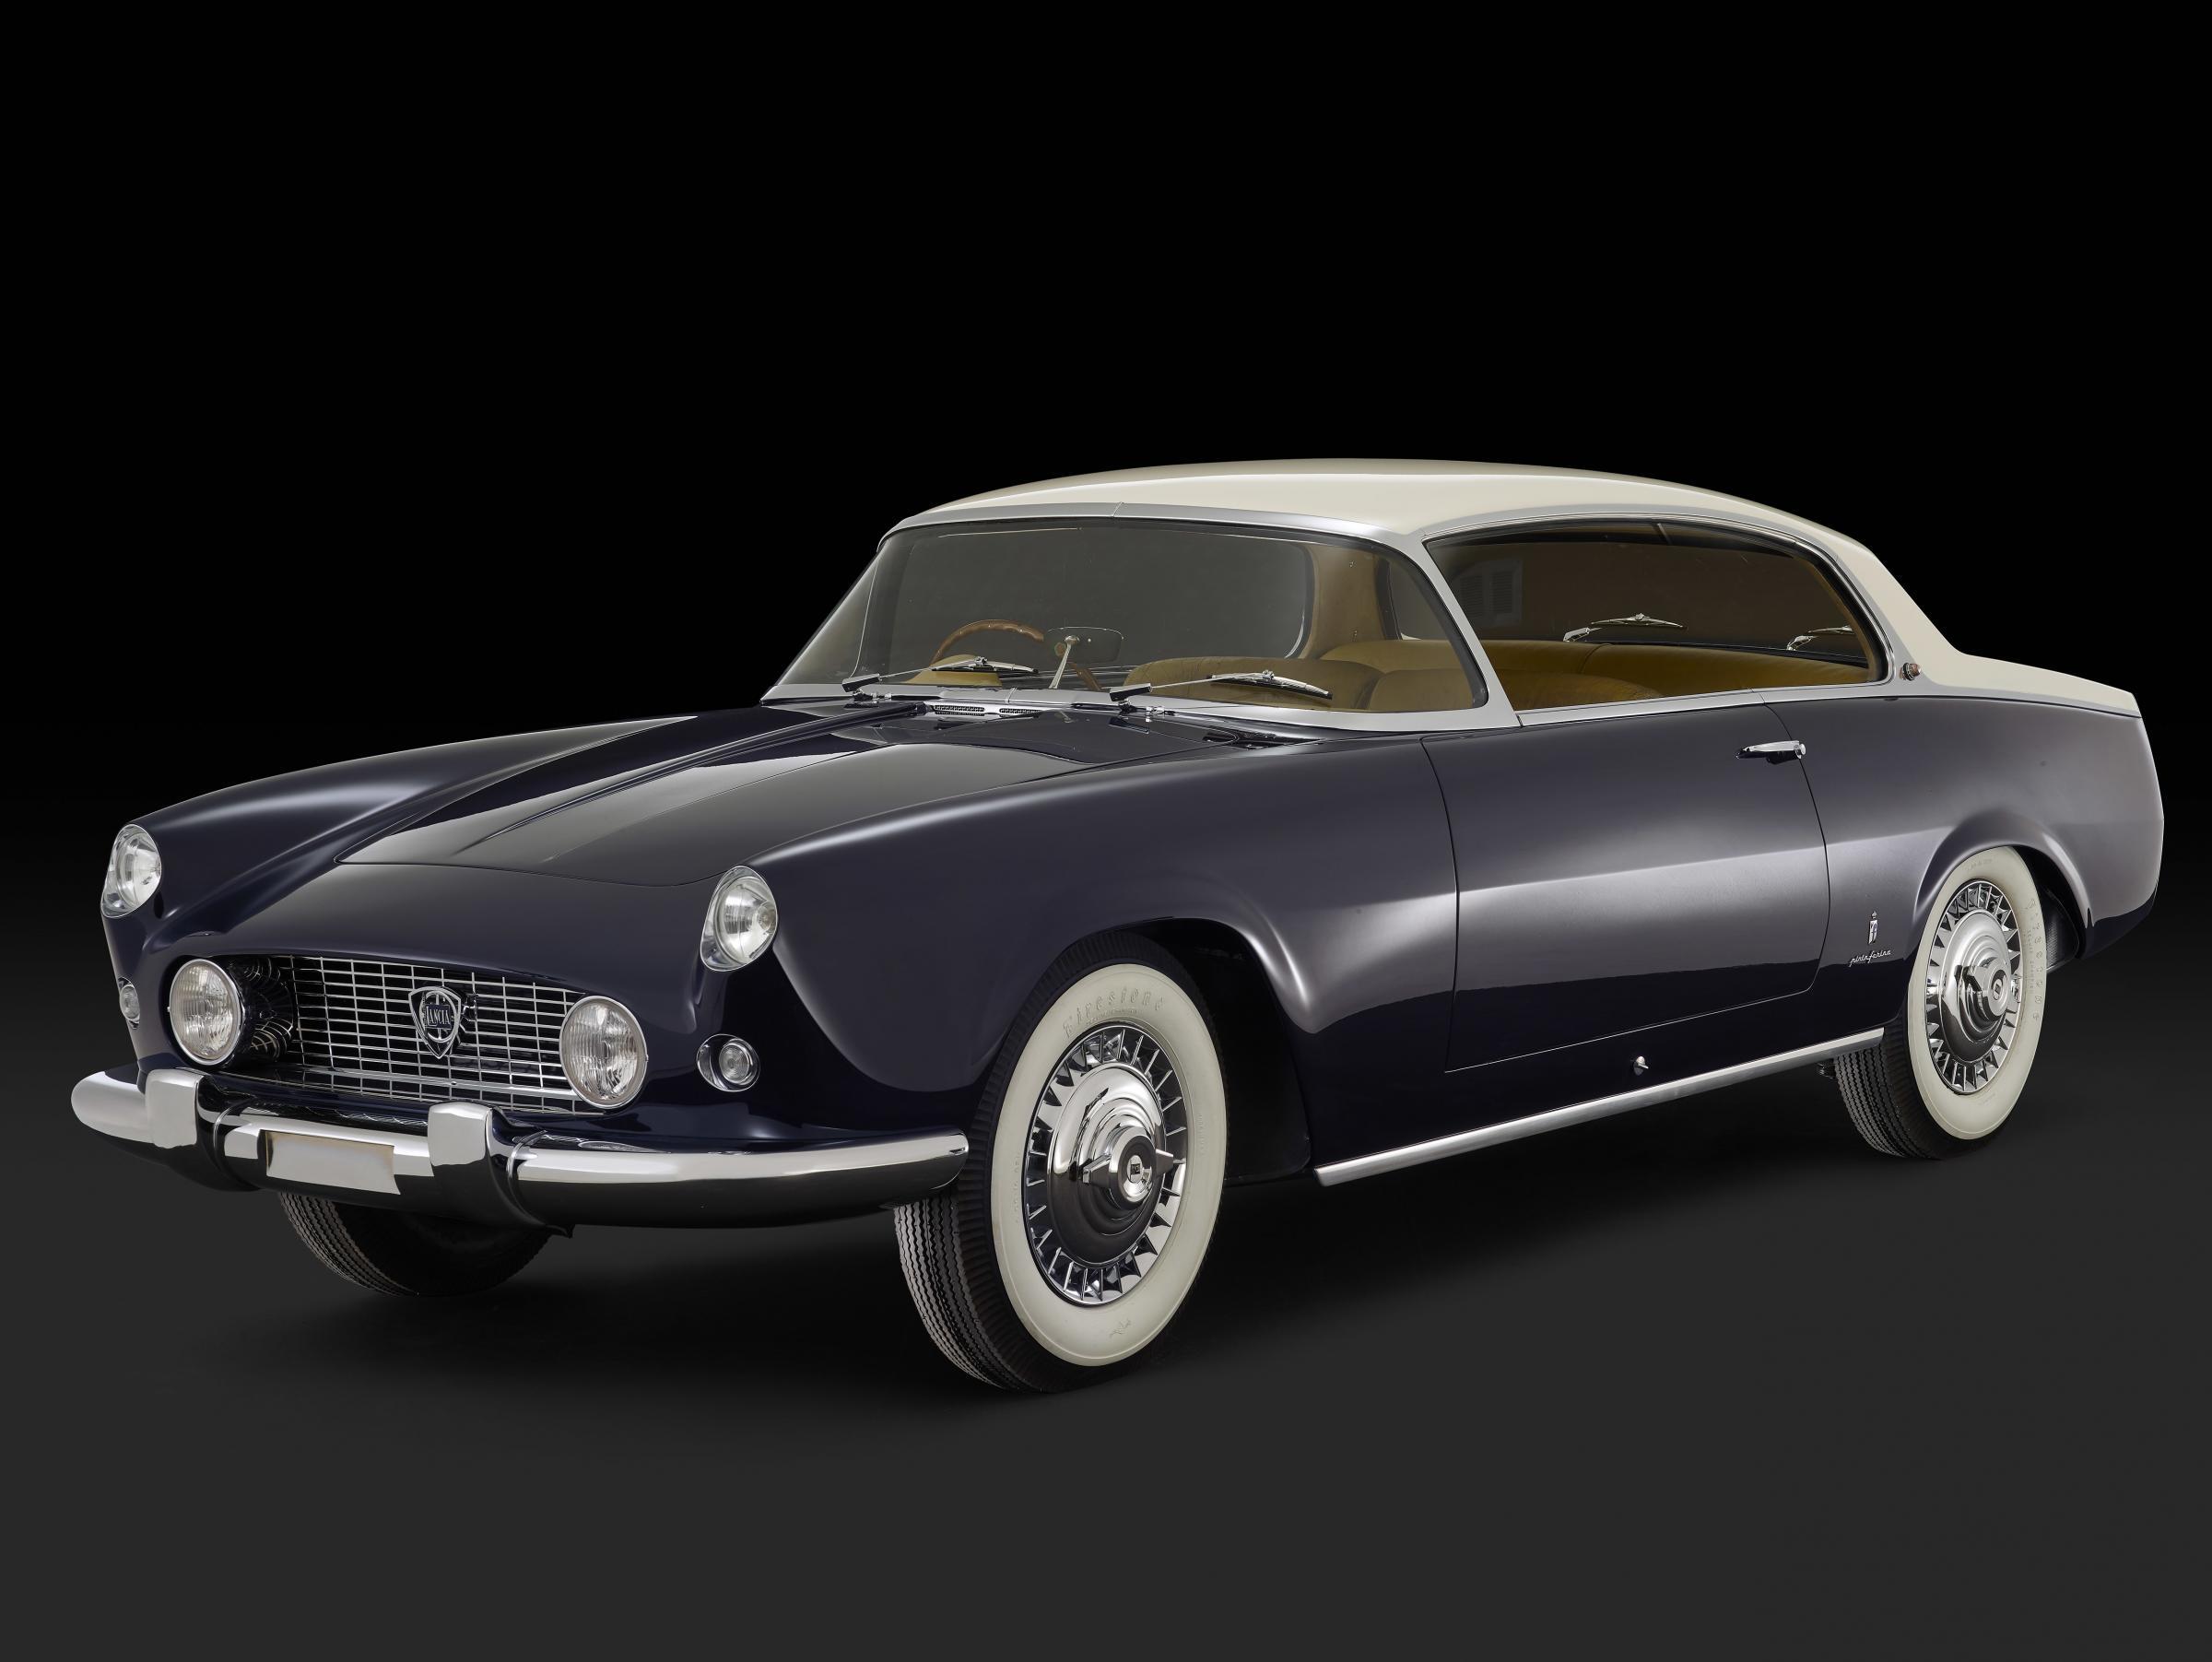 A Lopresto Lancia Florida will be on show this July